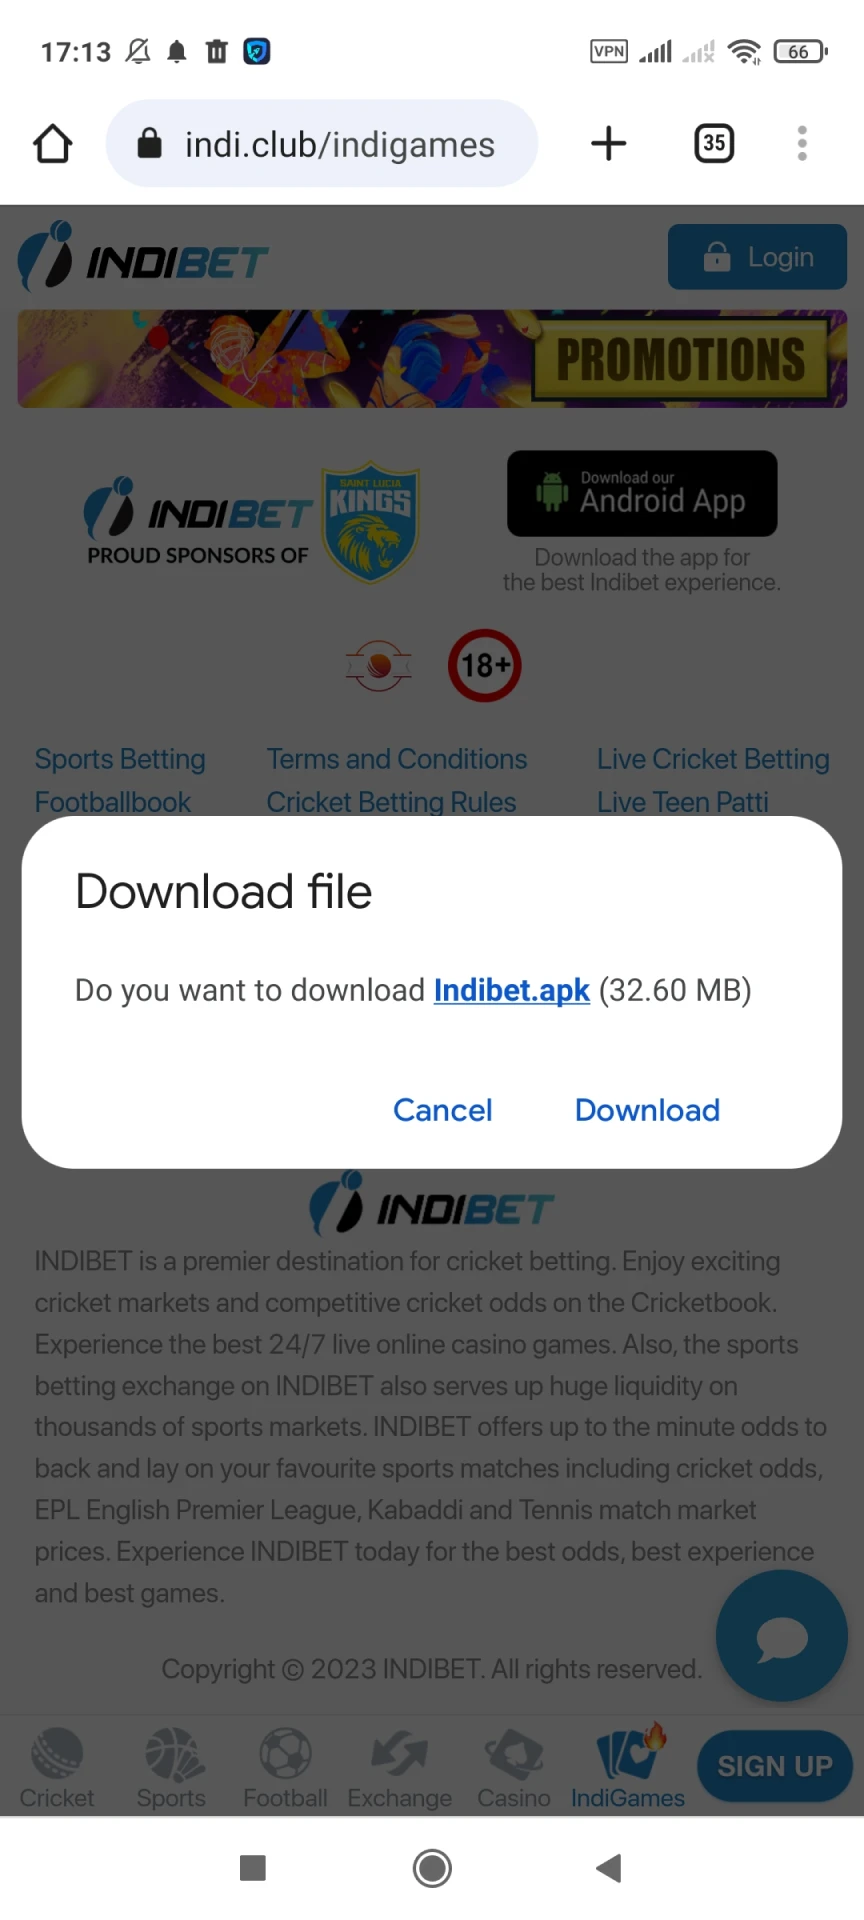 Download the Indibet app for Android.